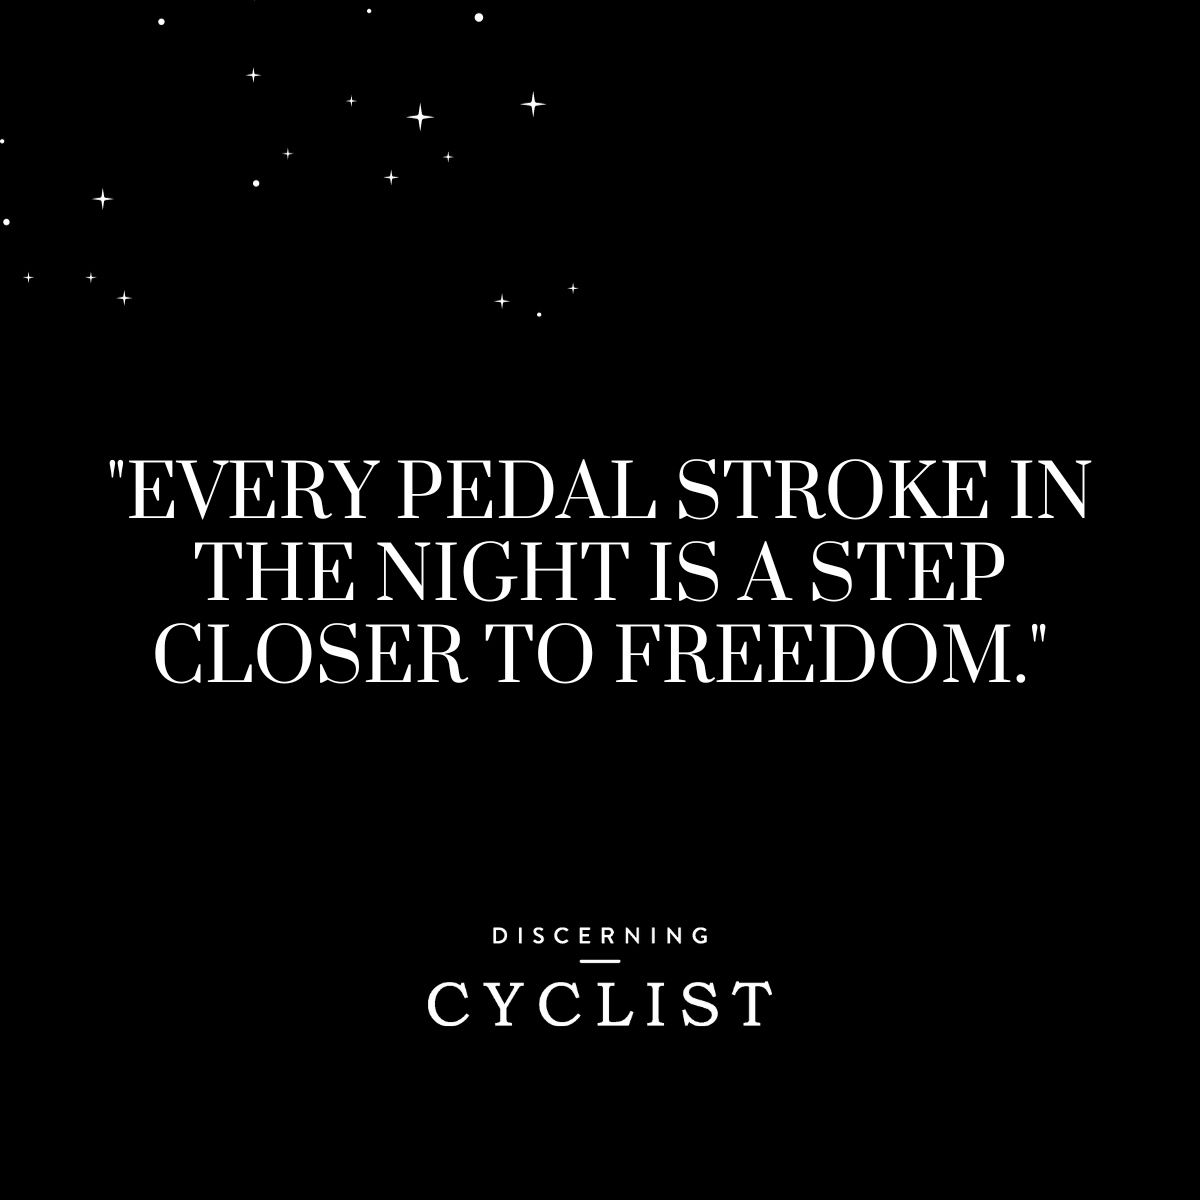 "Every pedal stroke in the night is a step closer to freedom."